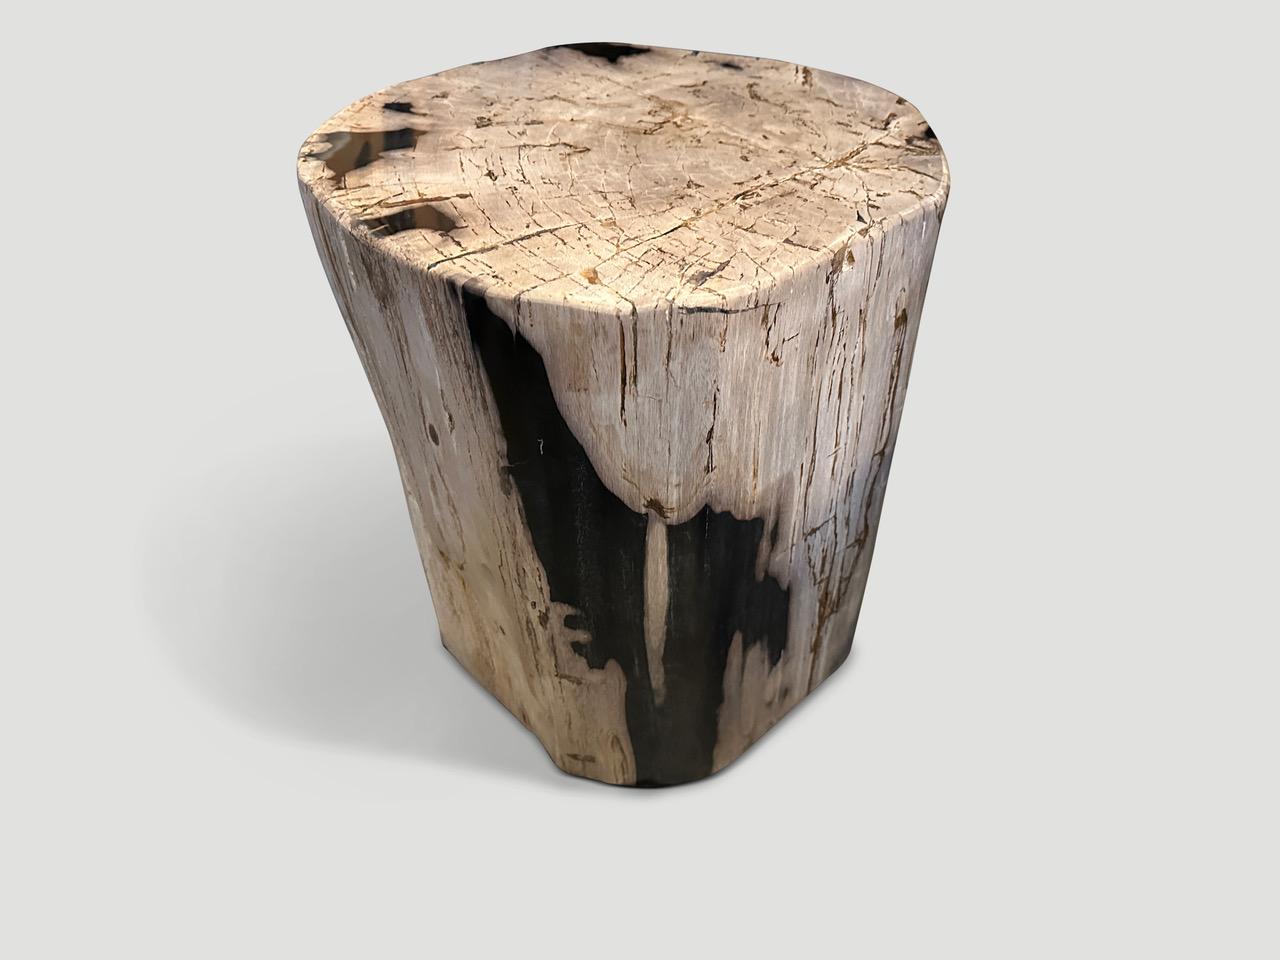 Beautiful contrasting tones and markings on this impressive high quality petrified wood side table. It’s fascinating how Mother Nature produces these exquisite 40 million year old petrified teak logs with such contrasting colors and natural patterns